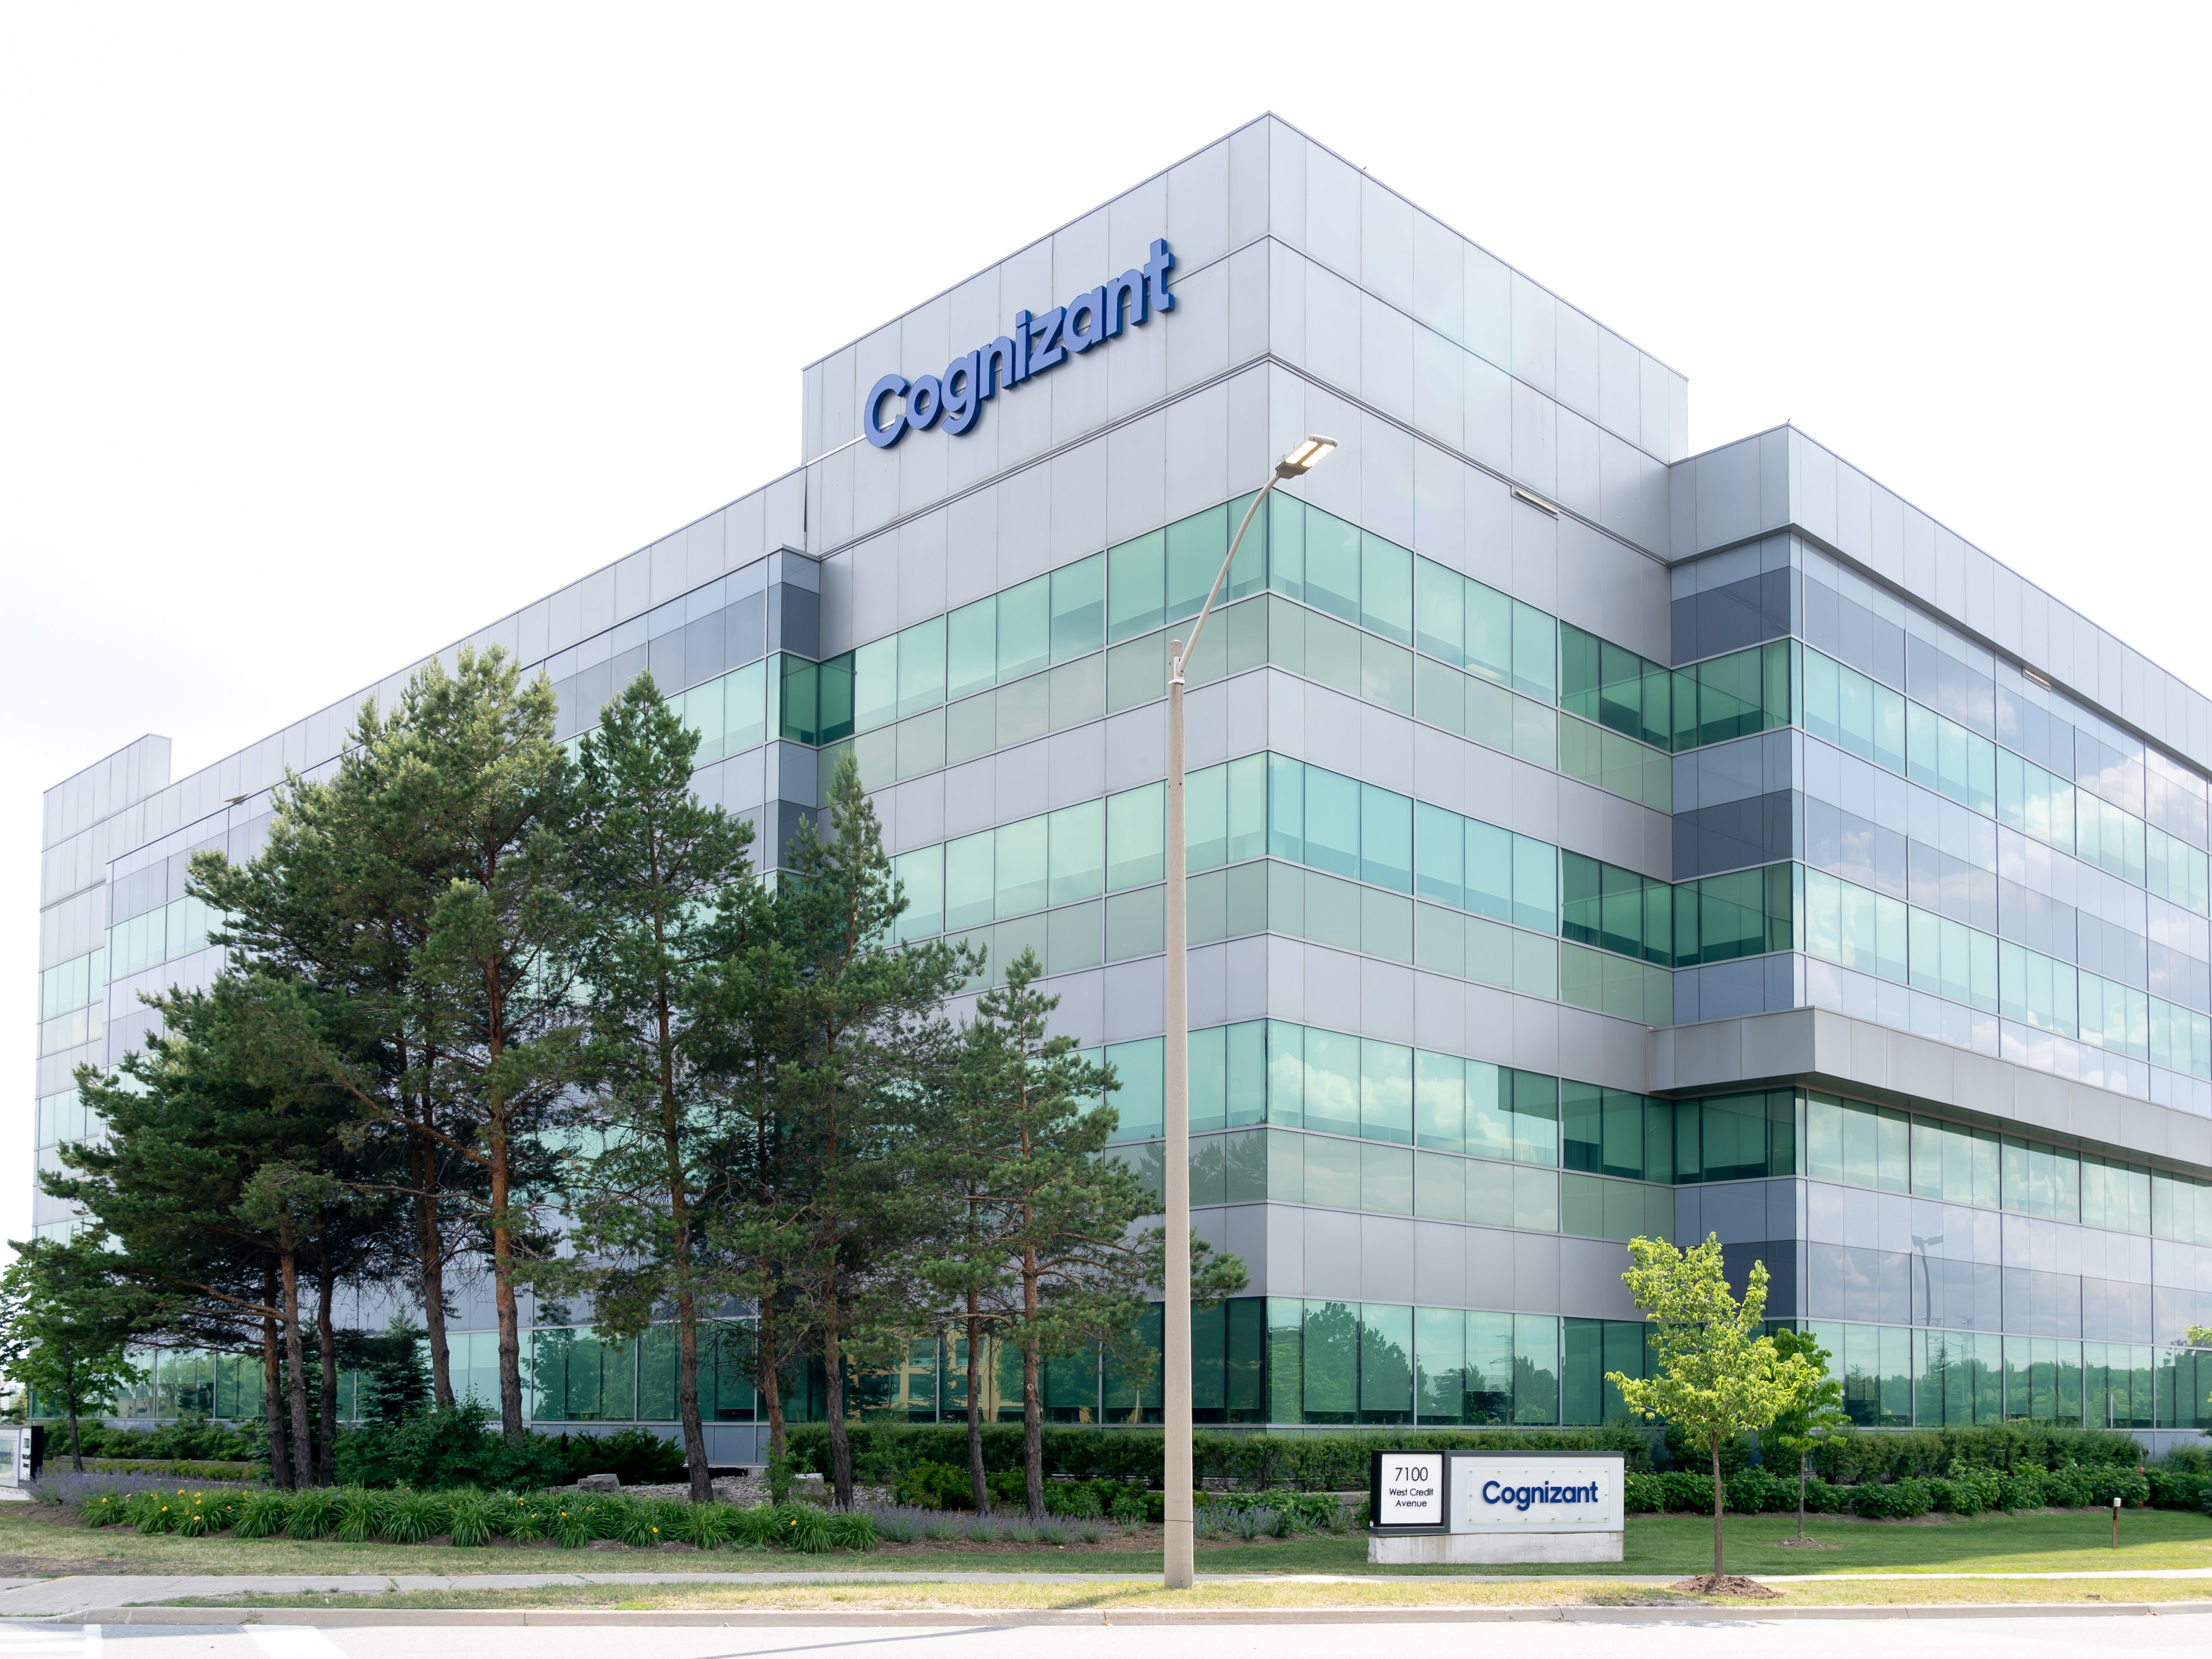 Cognizant current projects what is cms centers for medicare and medicaid